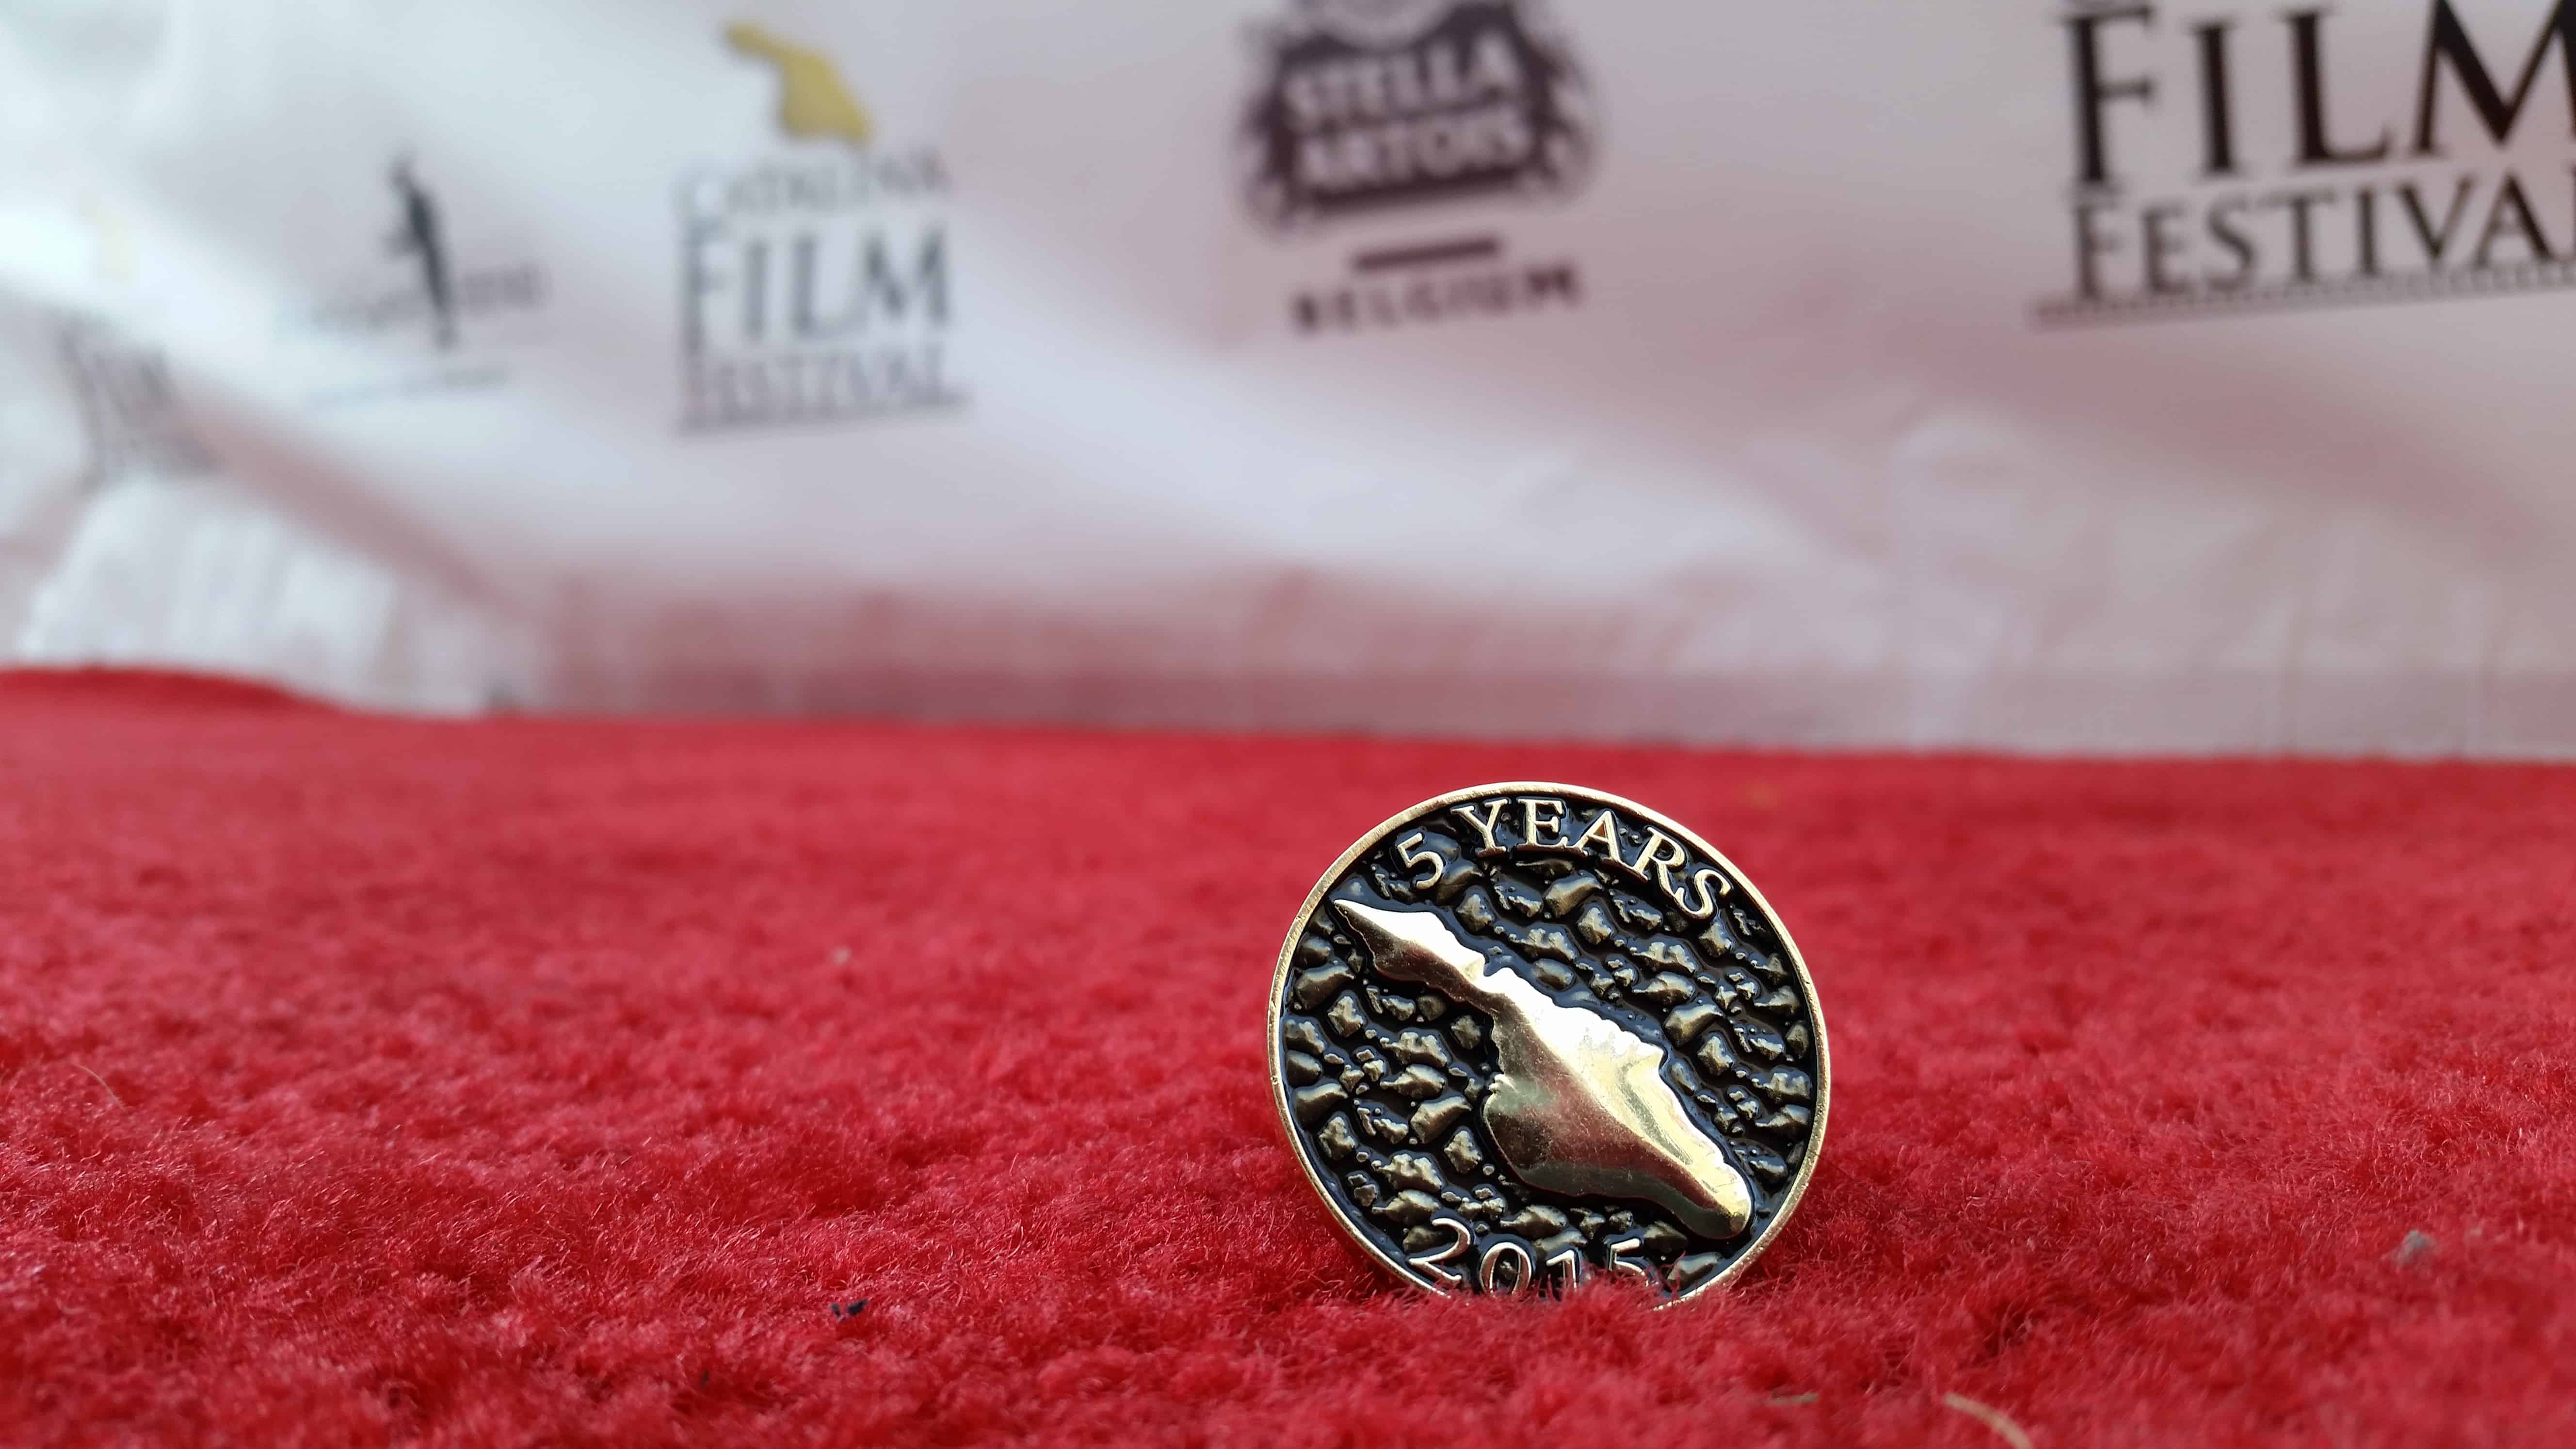 You are currently viewing The 2015 Catalina Film – Red Carpet Interviews